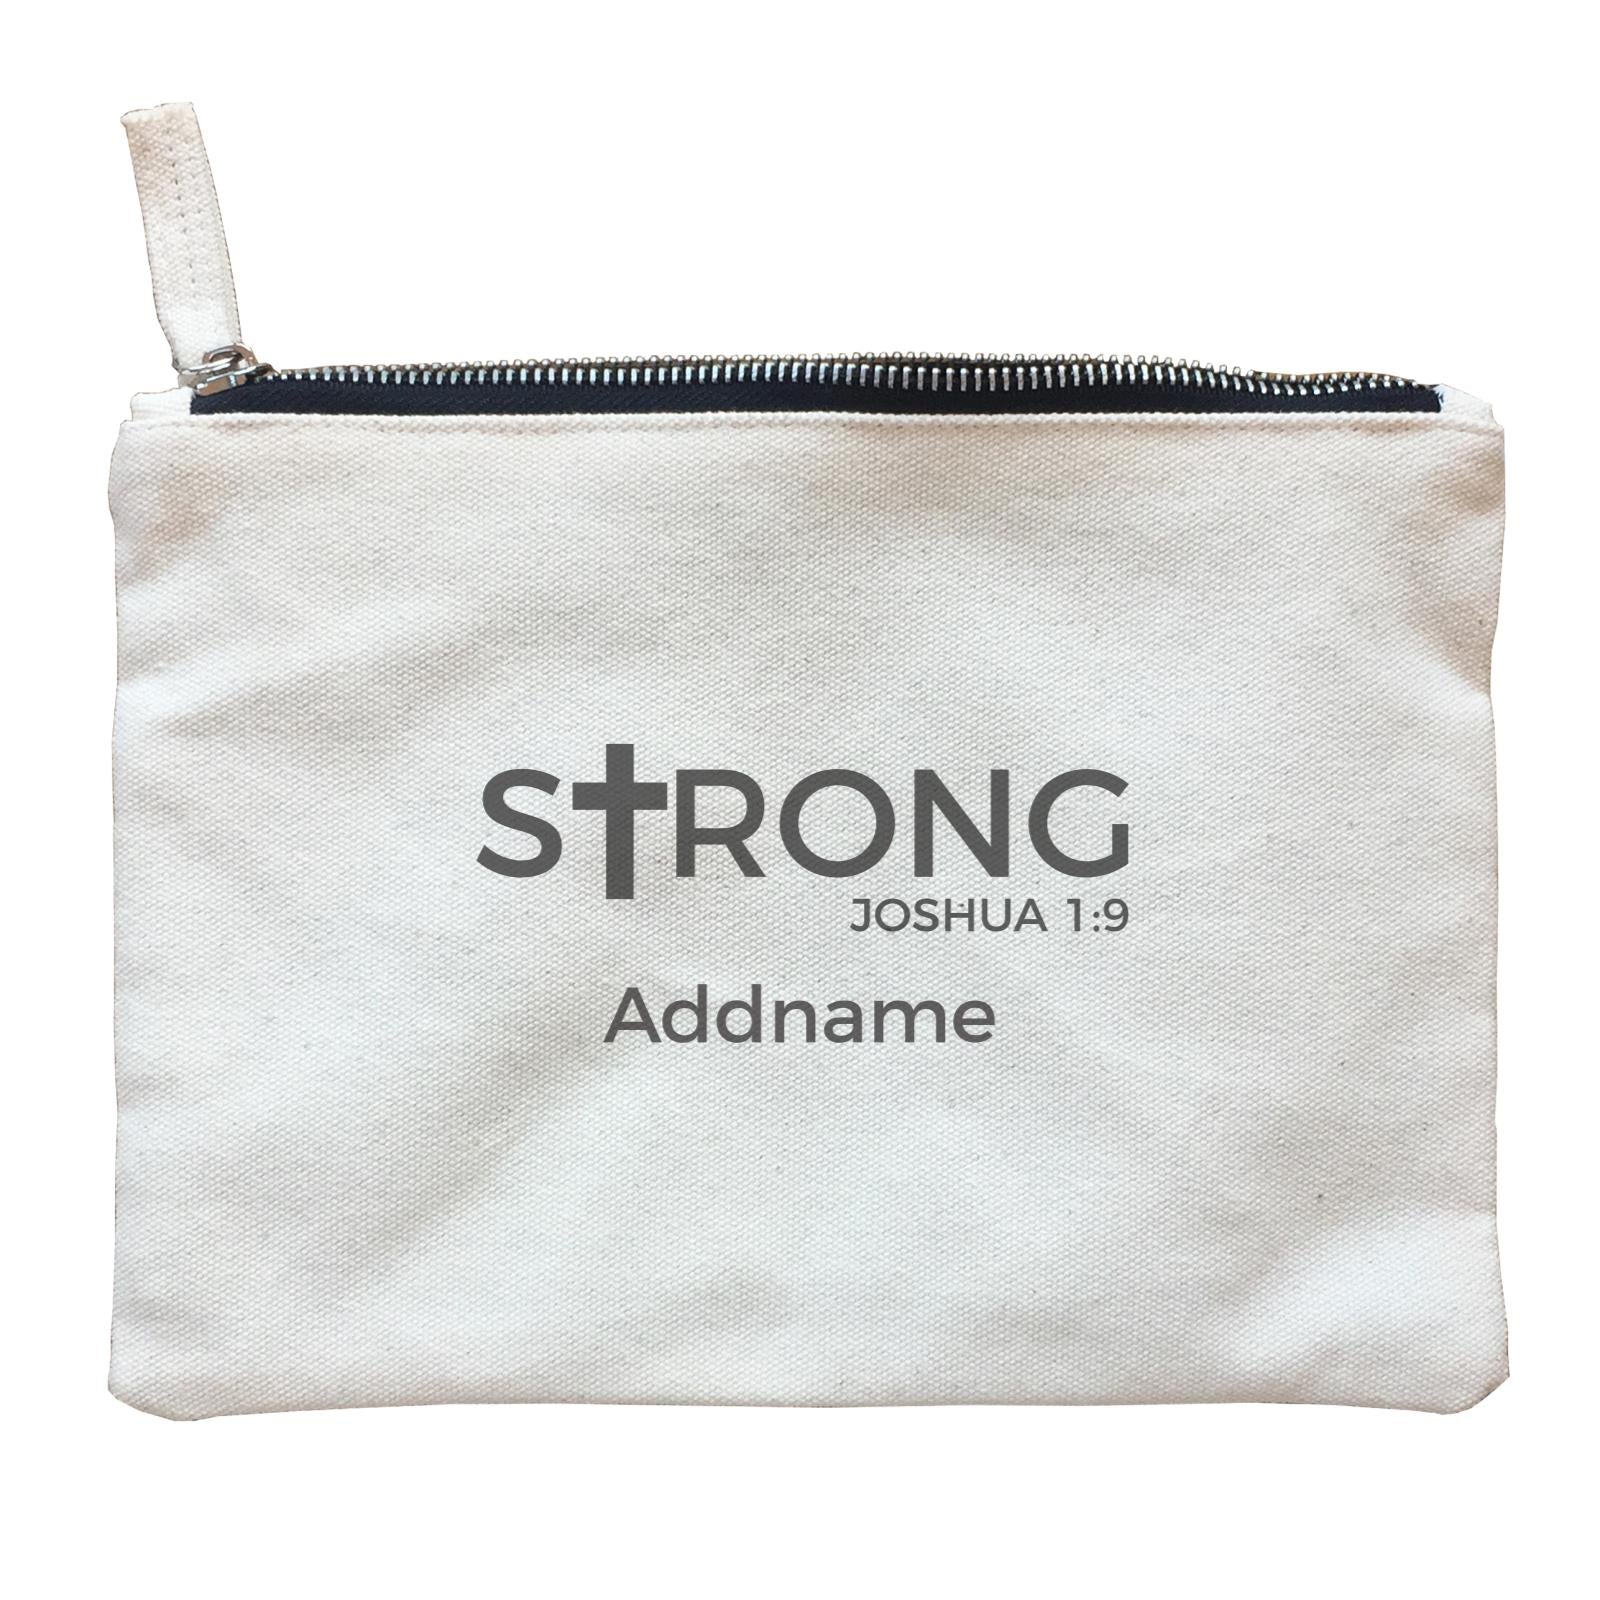 Christian Series Strong Joshua 19 Addname Accessories Zipper Pouch